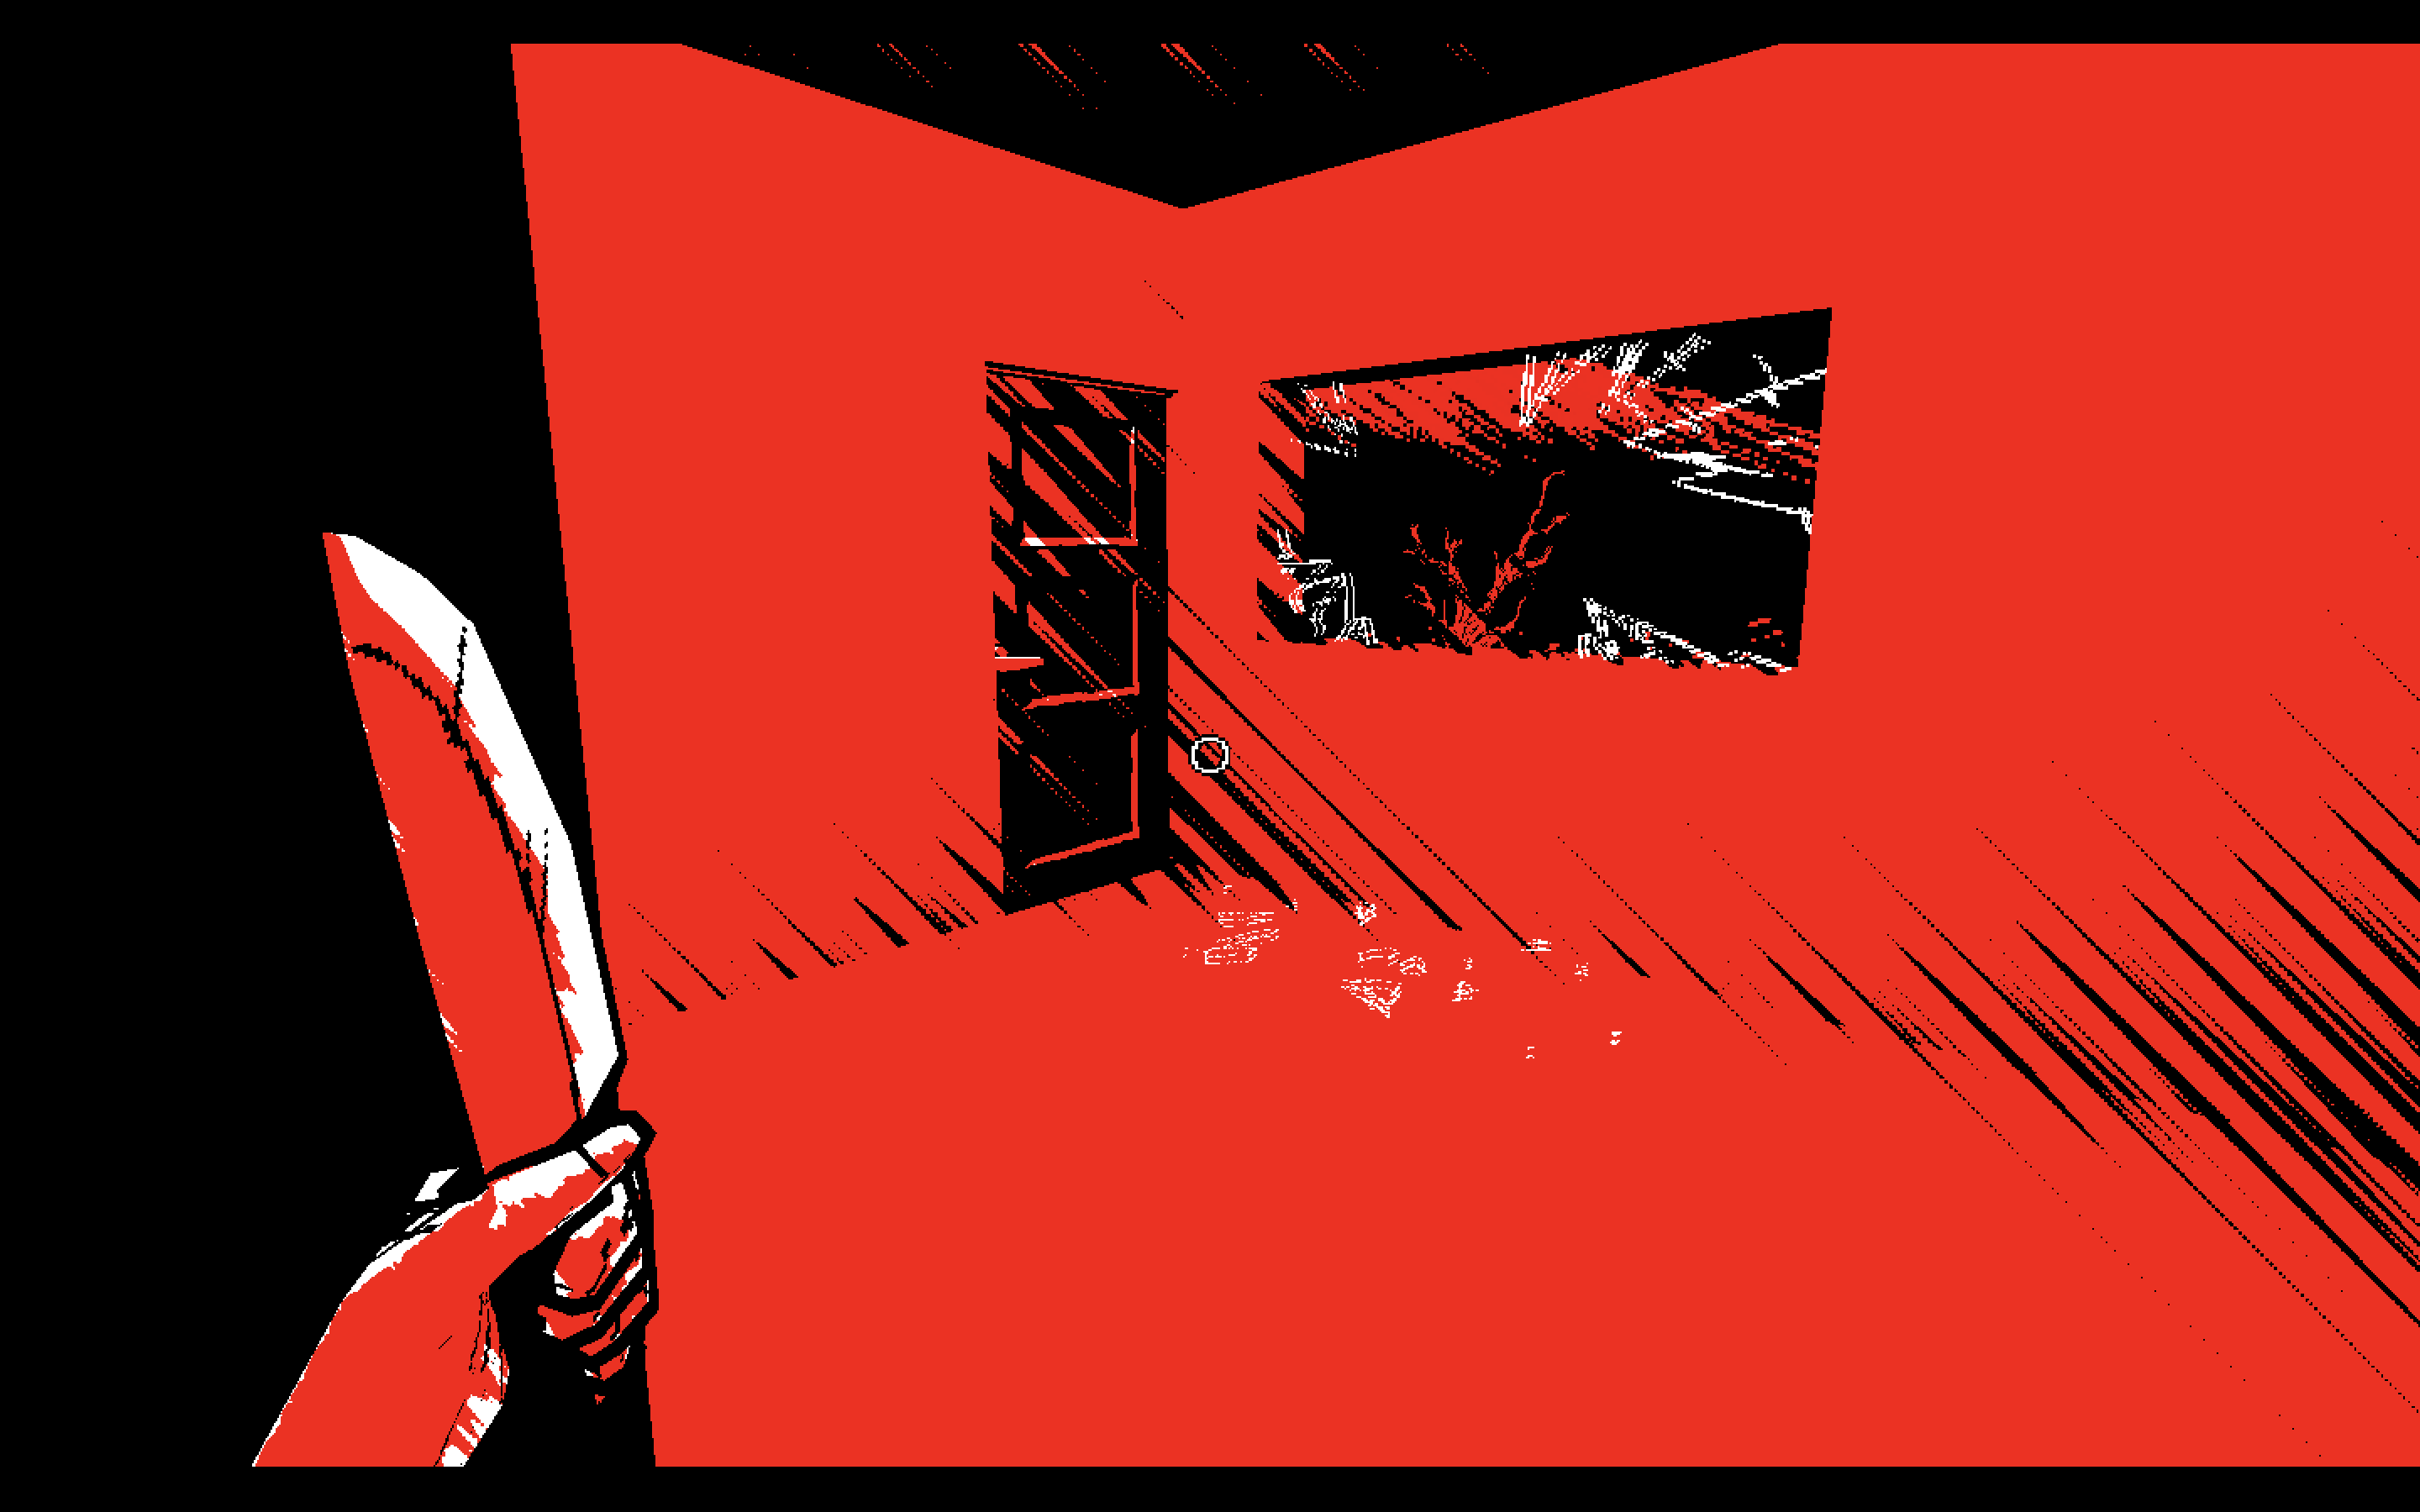 A screesnhot from the game Veinless Property, depicting a knife raised in first-person perspective and a broken window in the foreground. All in high-contrast red, black, and white.